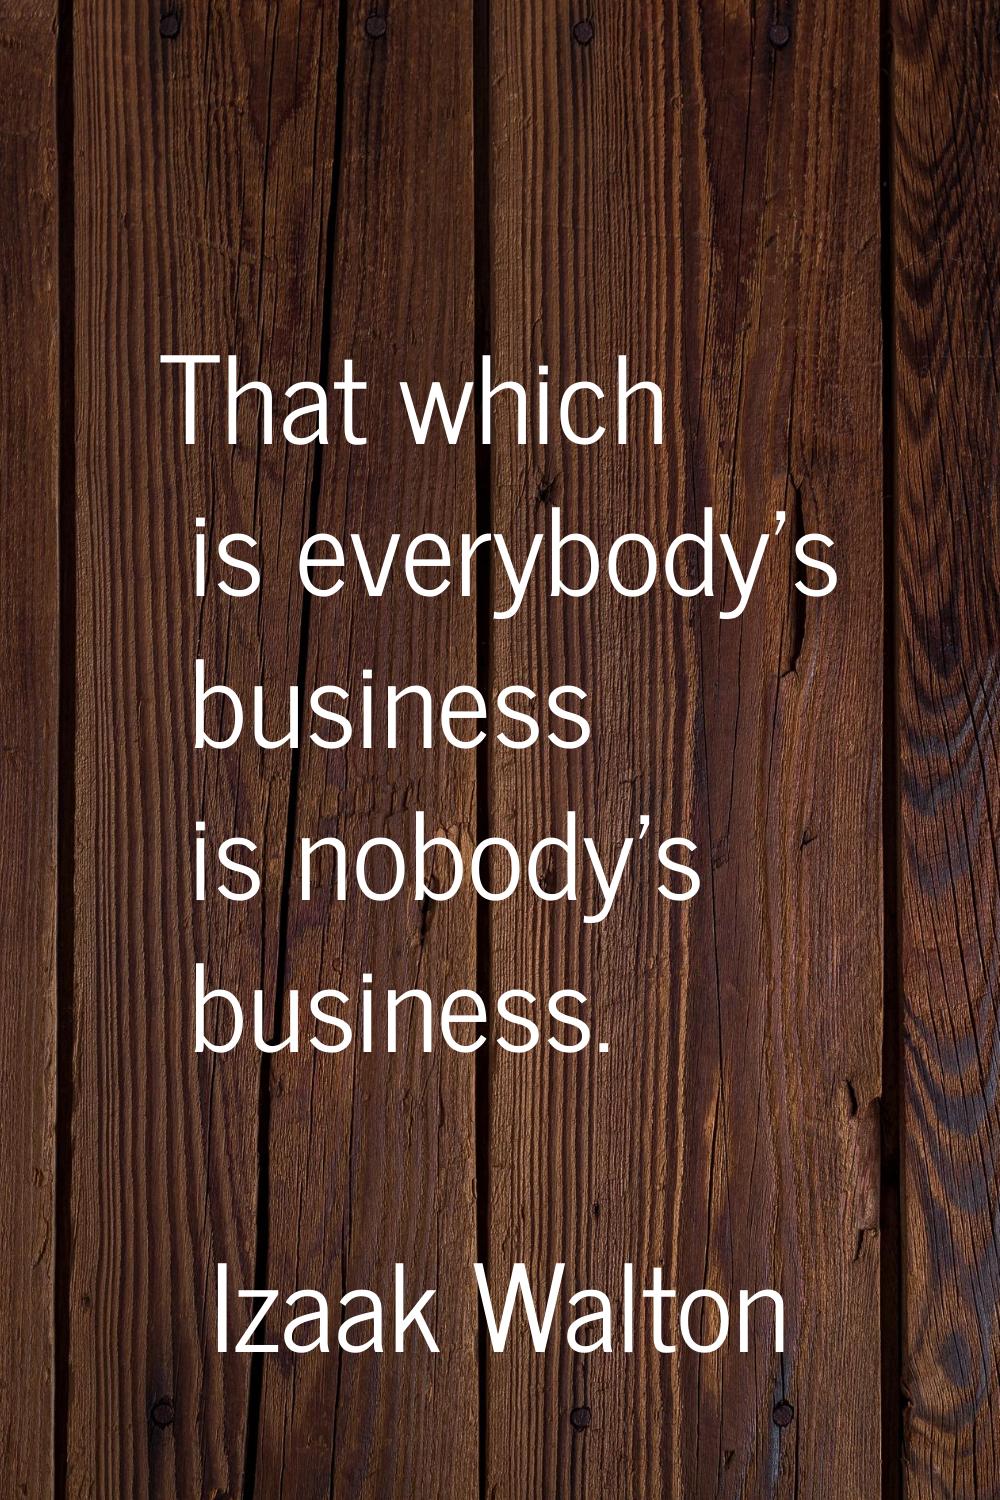 That which is everybody's business is nobody's business.